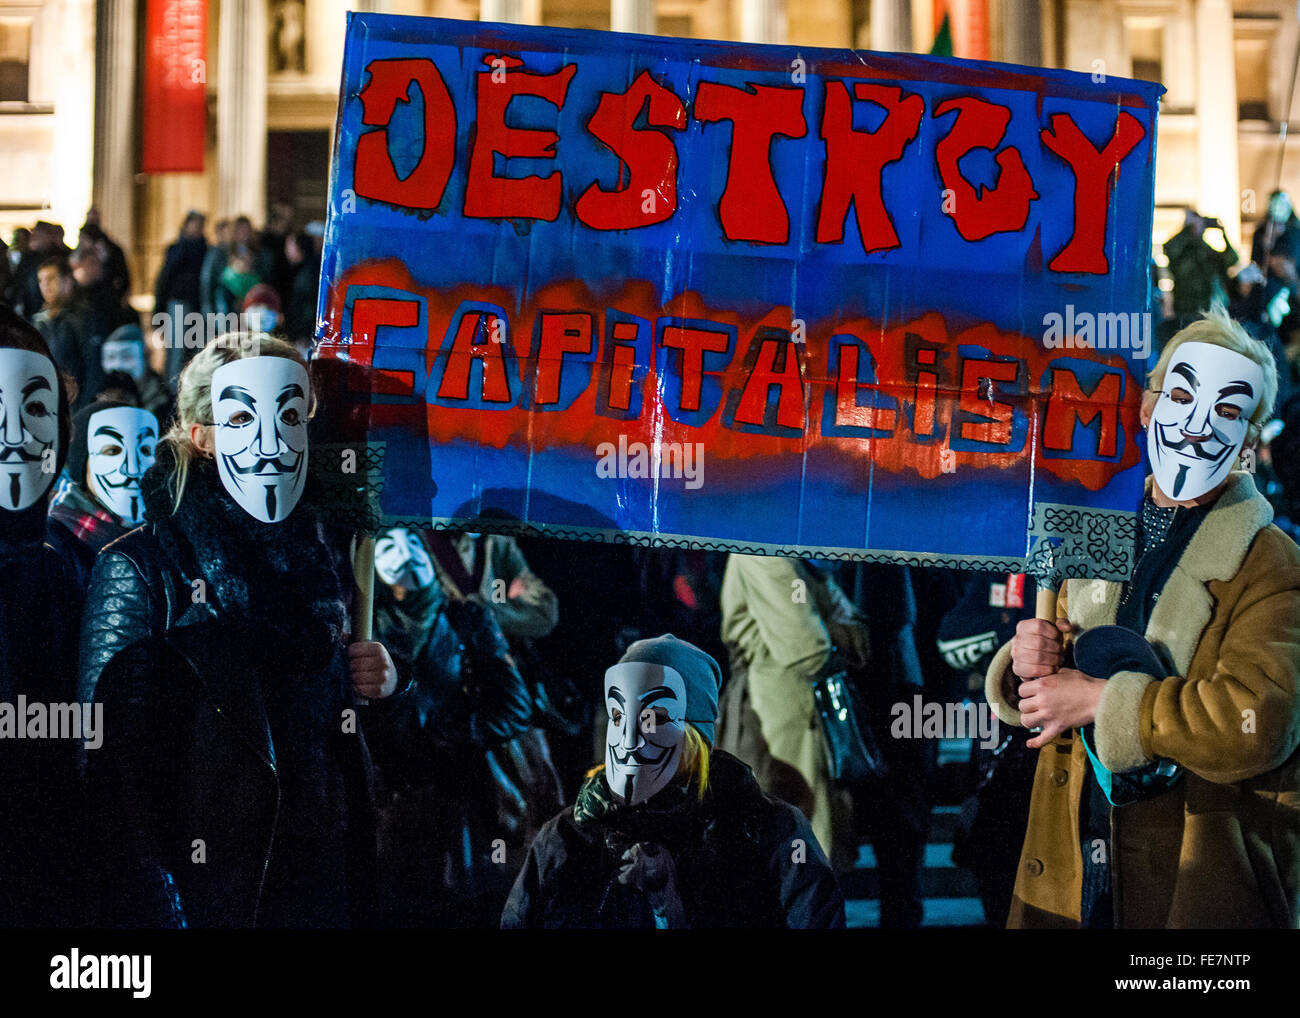 Masked protesters, Million Mask March, London 2014 Stock Photo